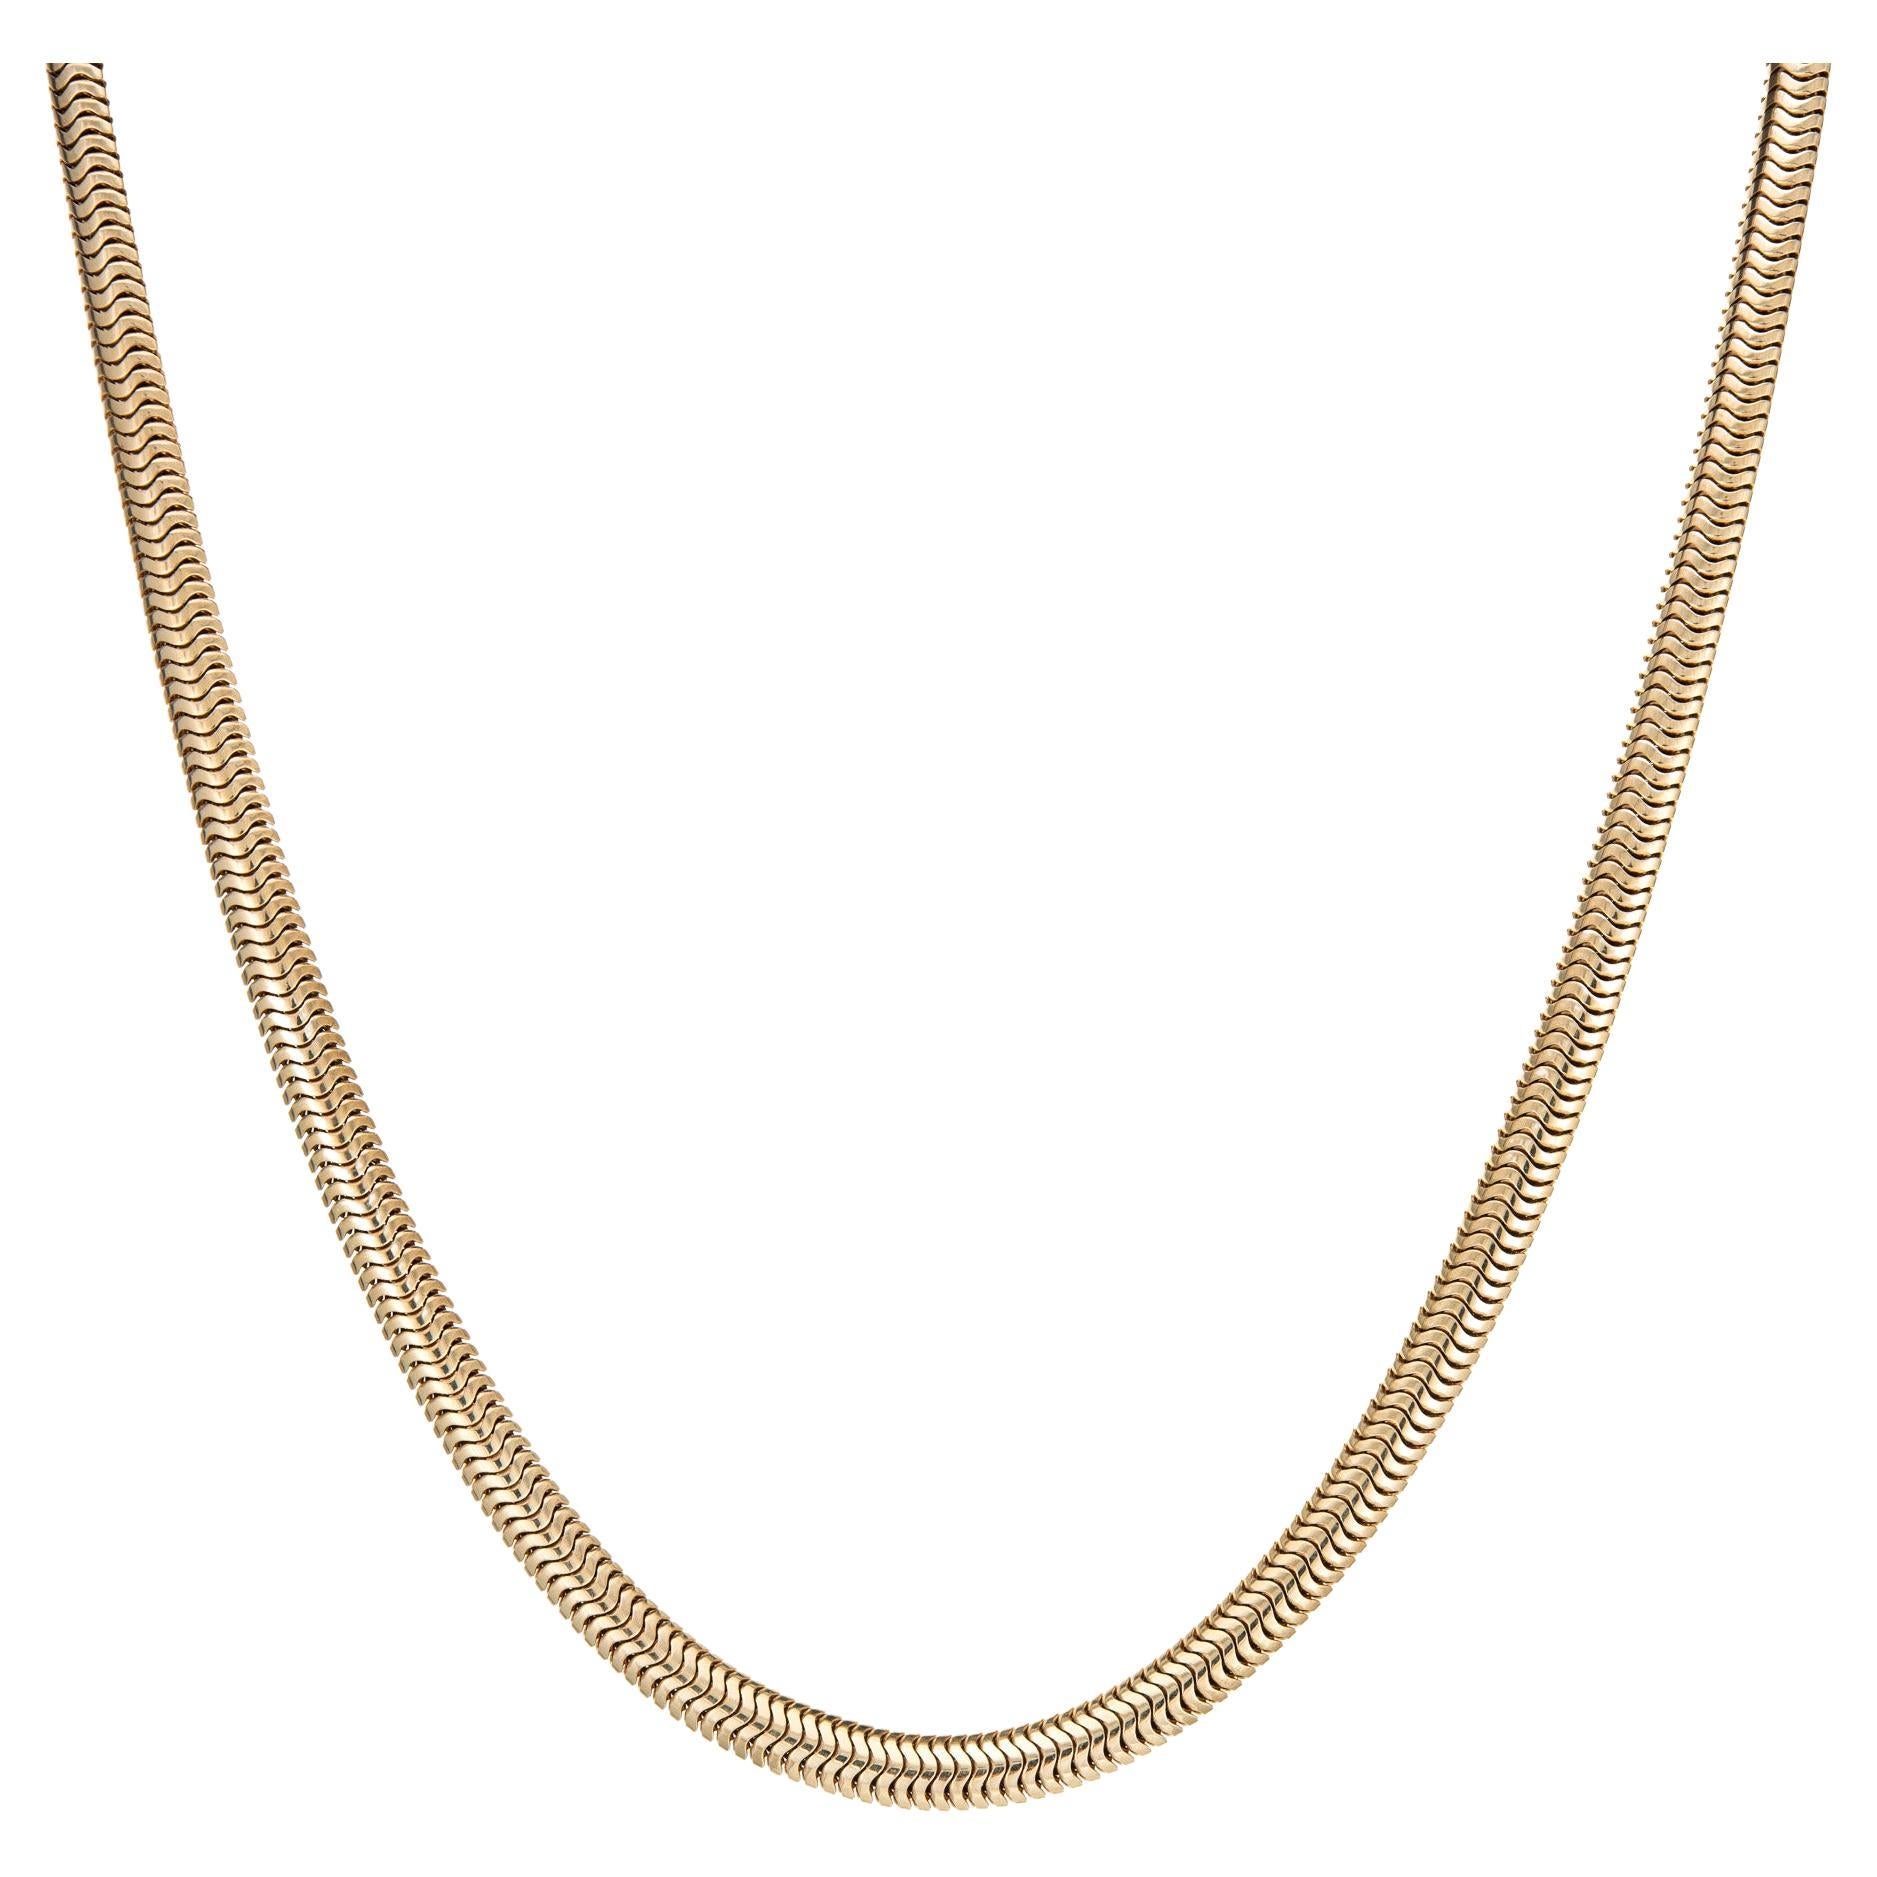 Retro Vintage Snake Necklace 10k Yellow Gold 16" Choker Length Fine Jewelry For Sale